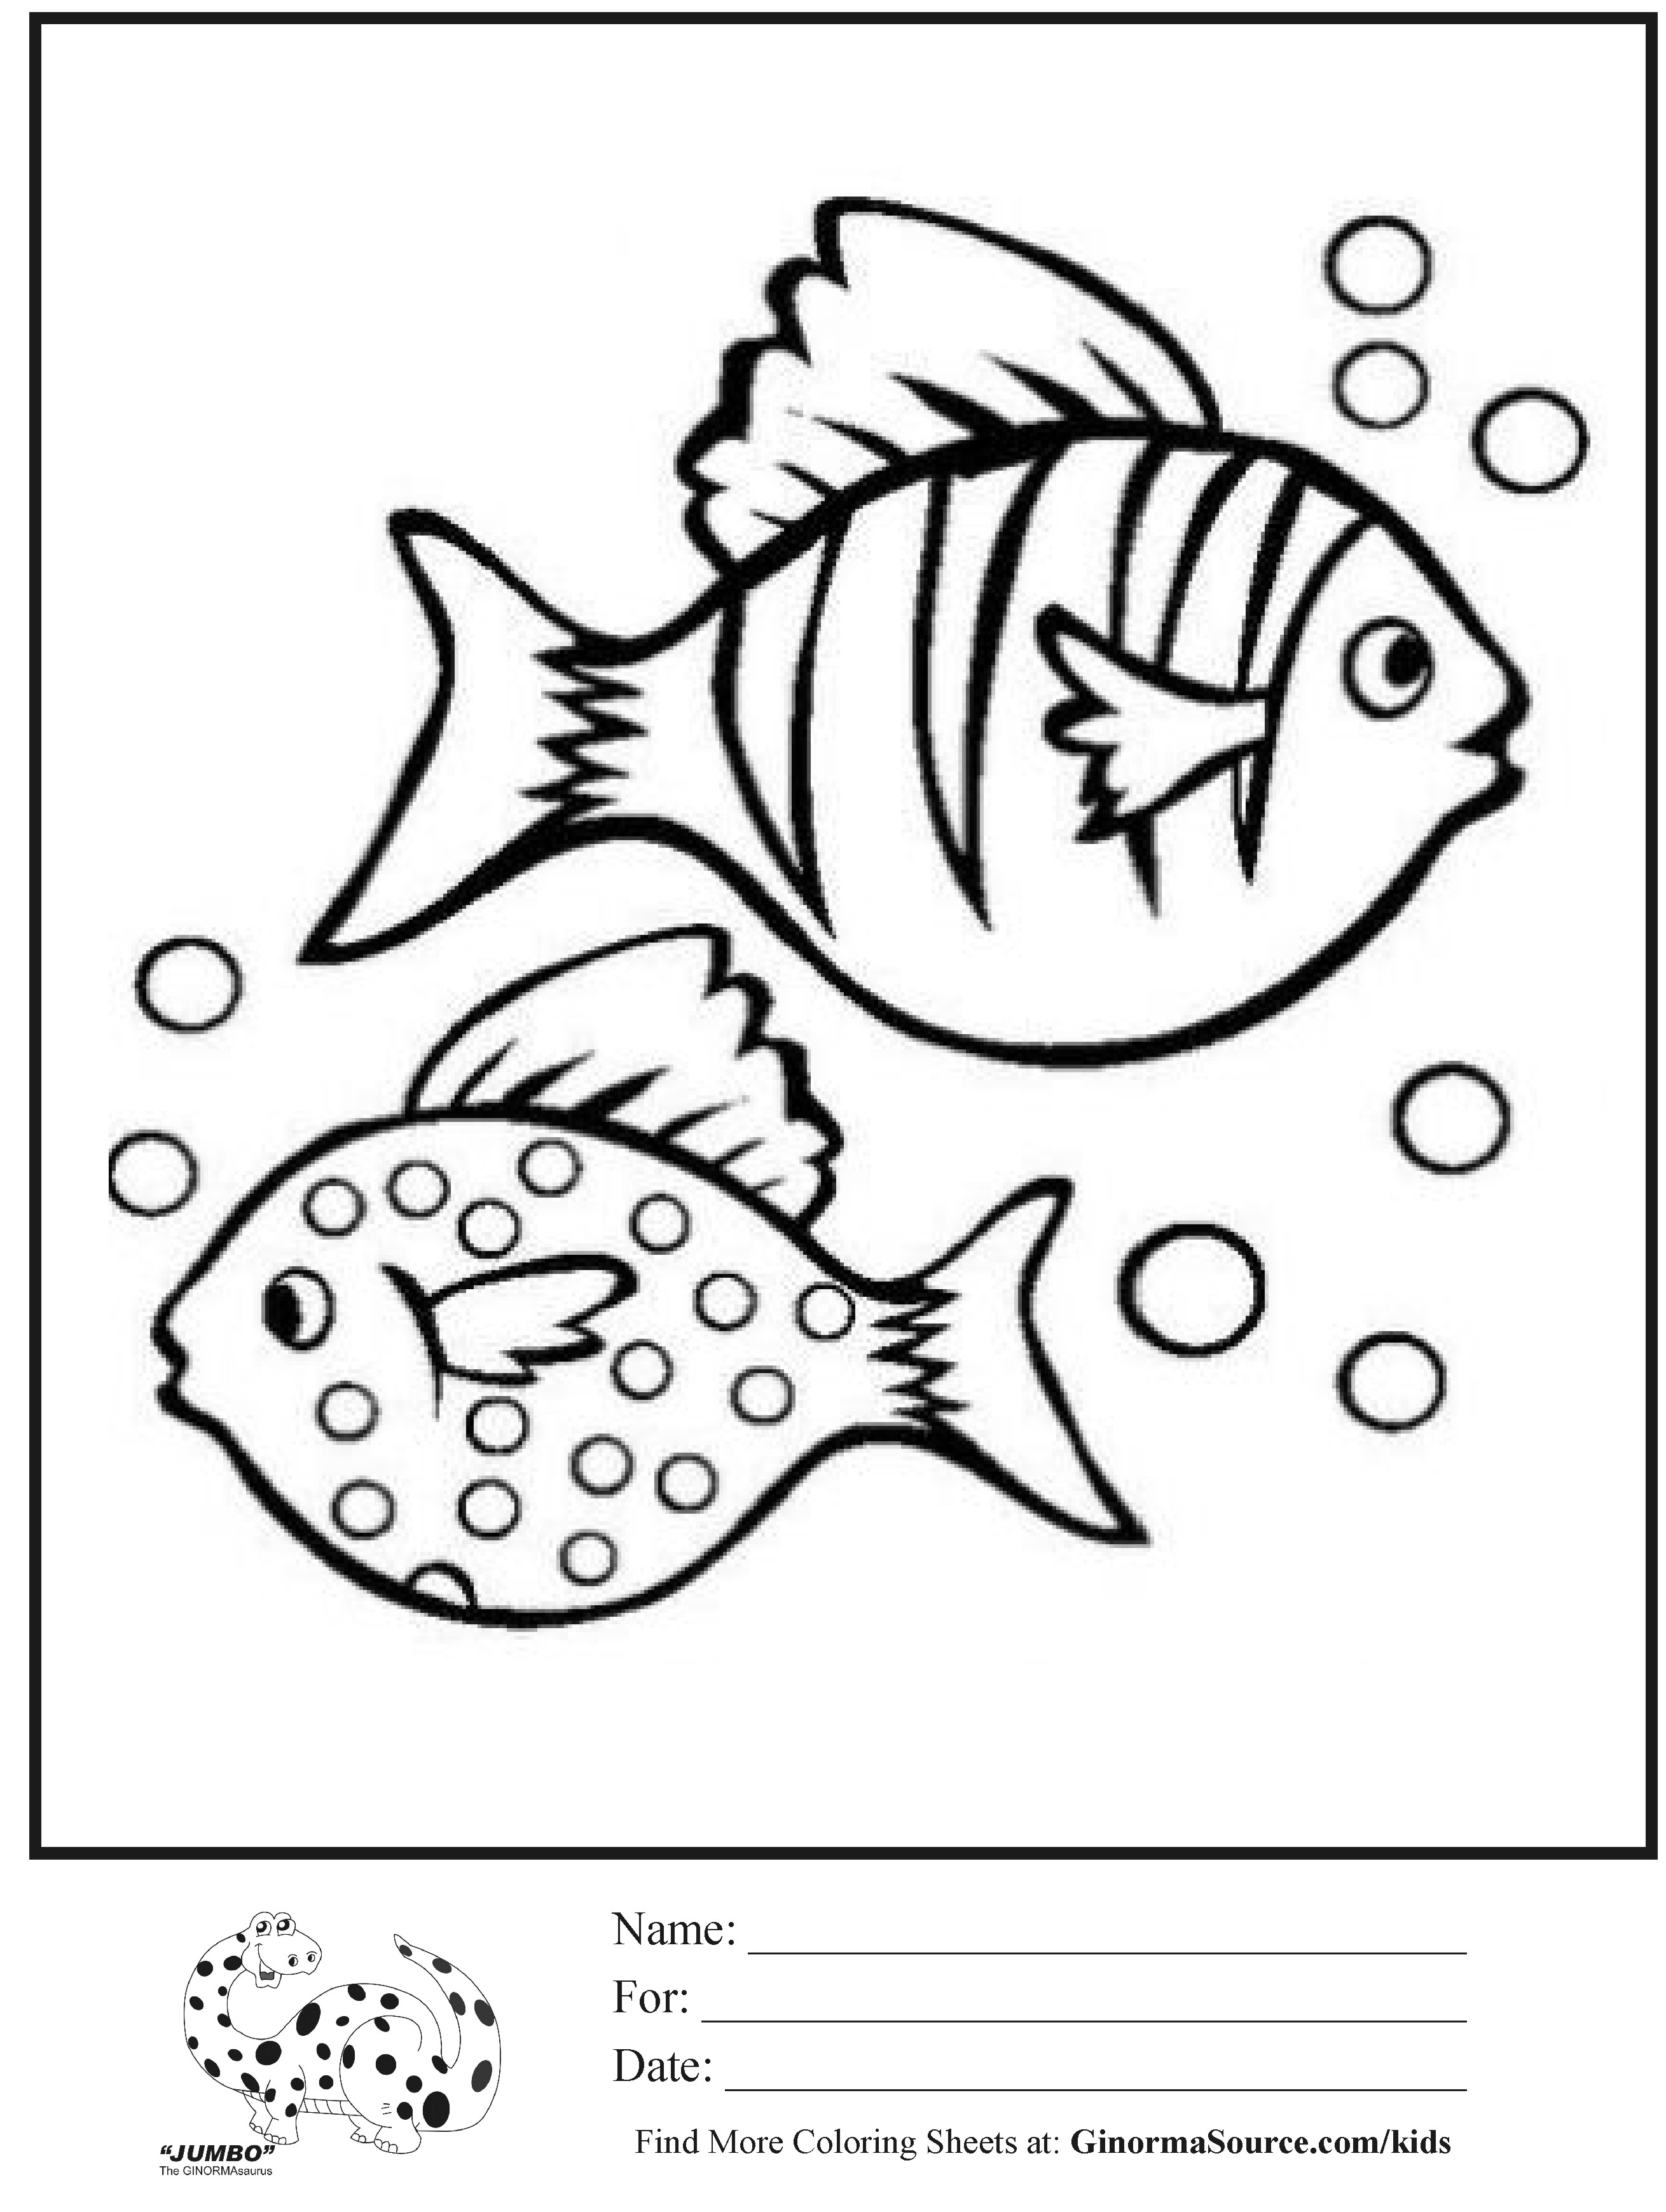 Swimming Coloring Page for Preschoolers, swimming pool safety 